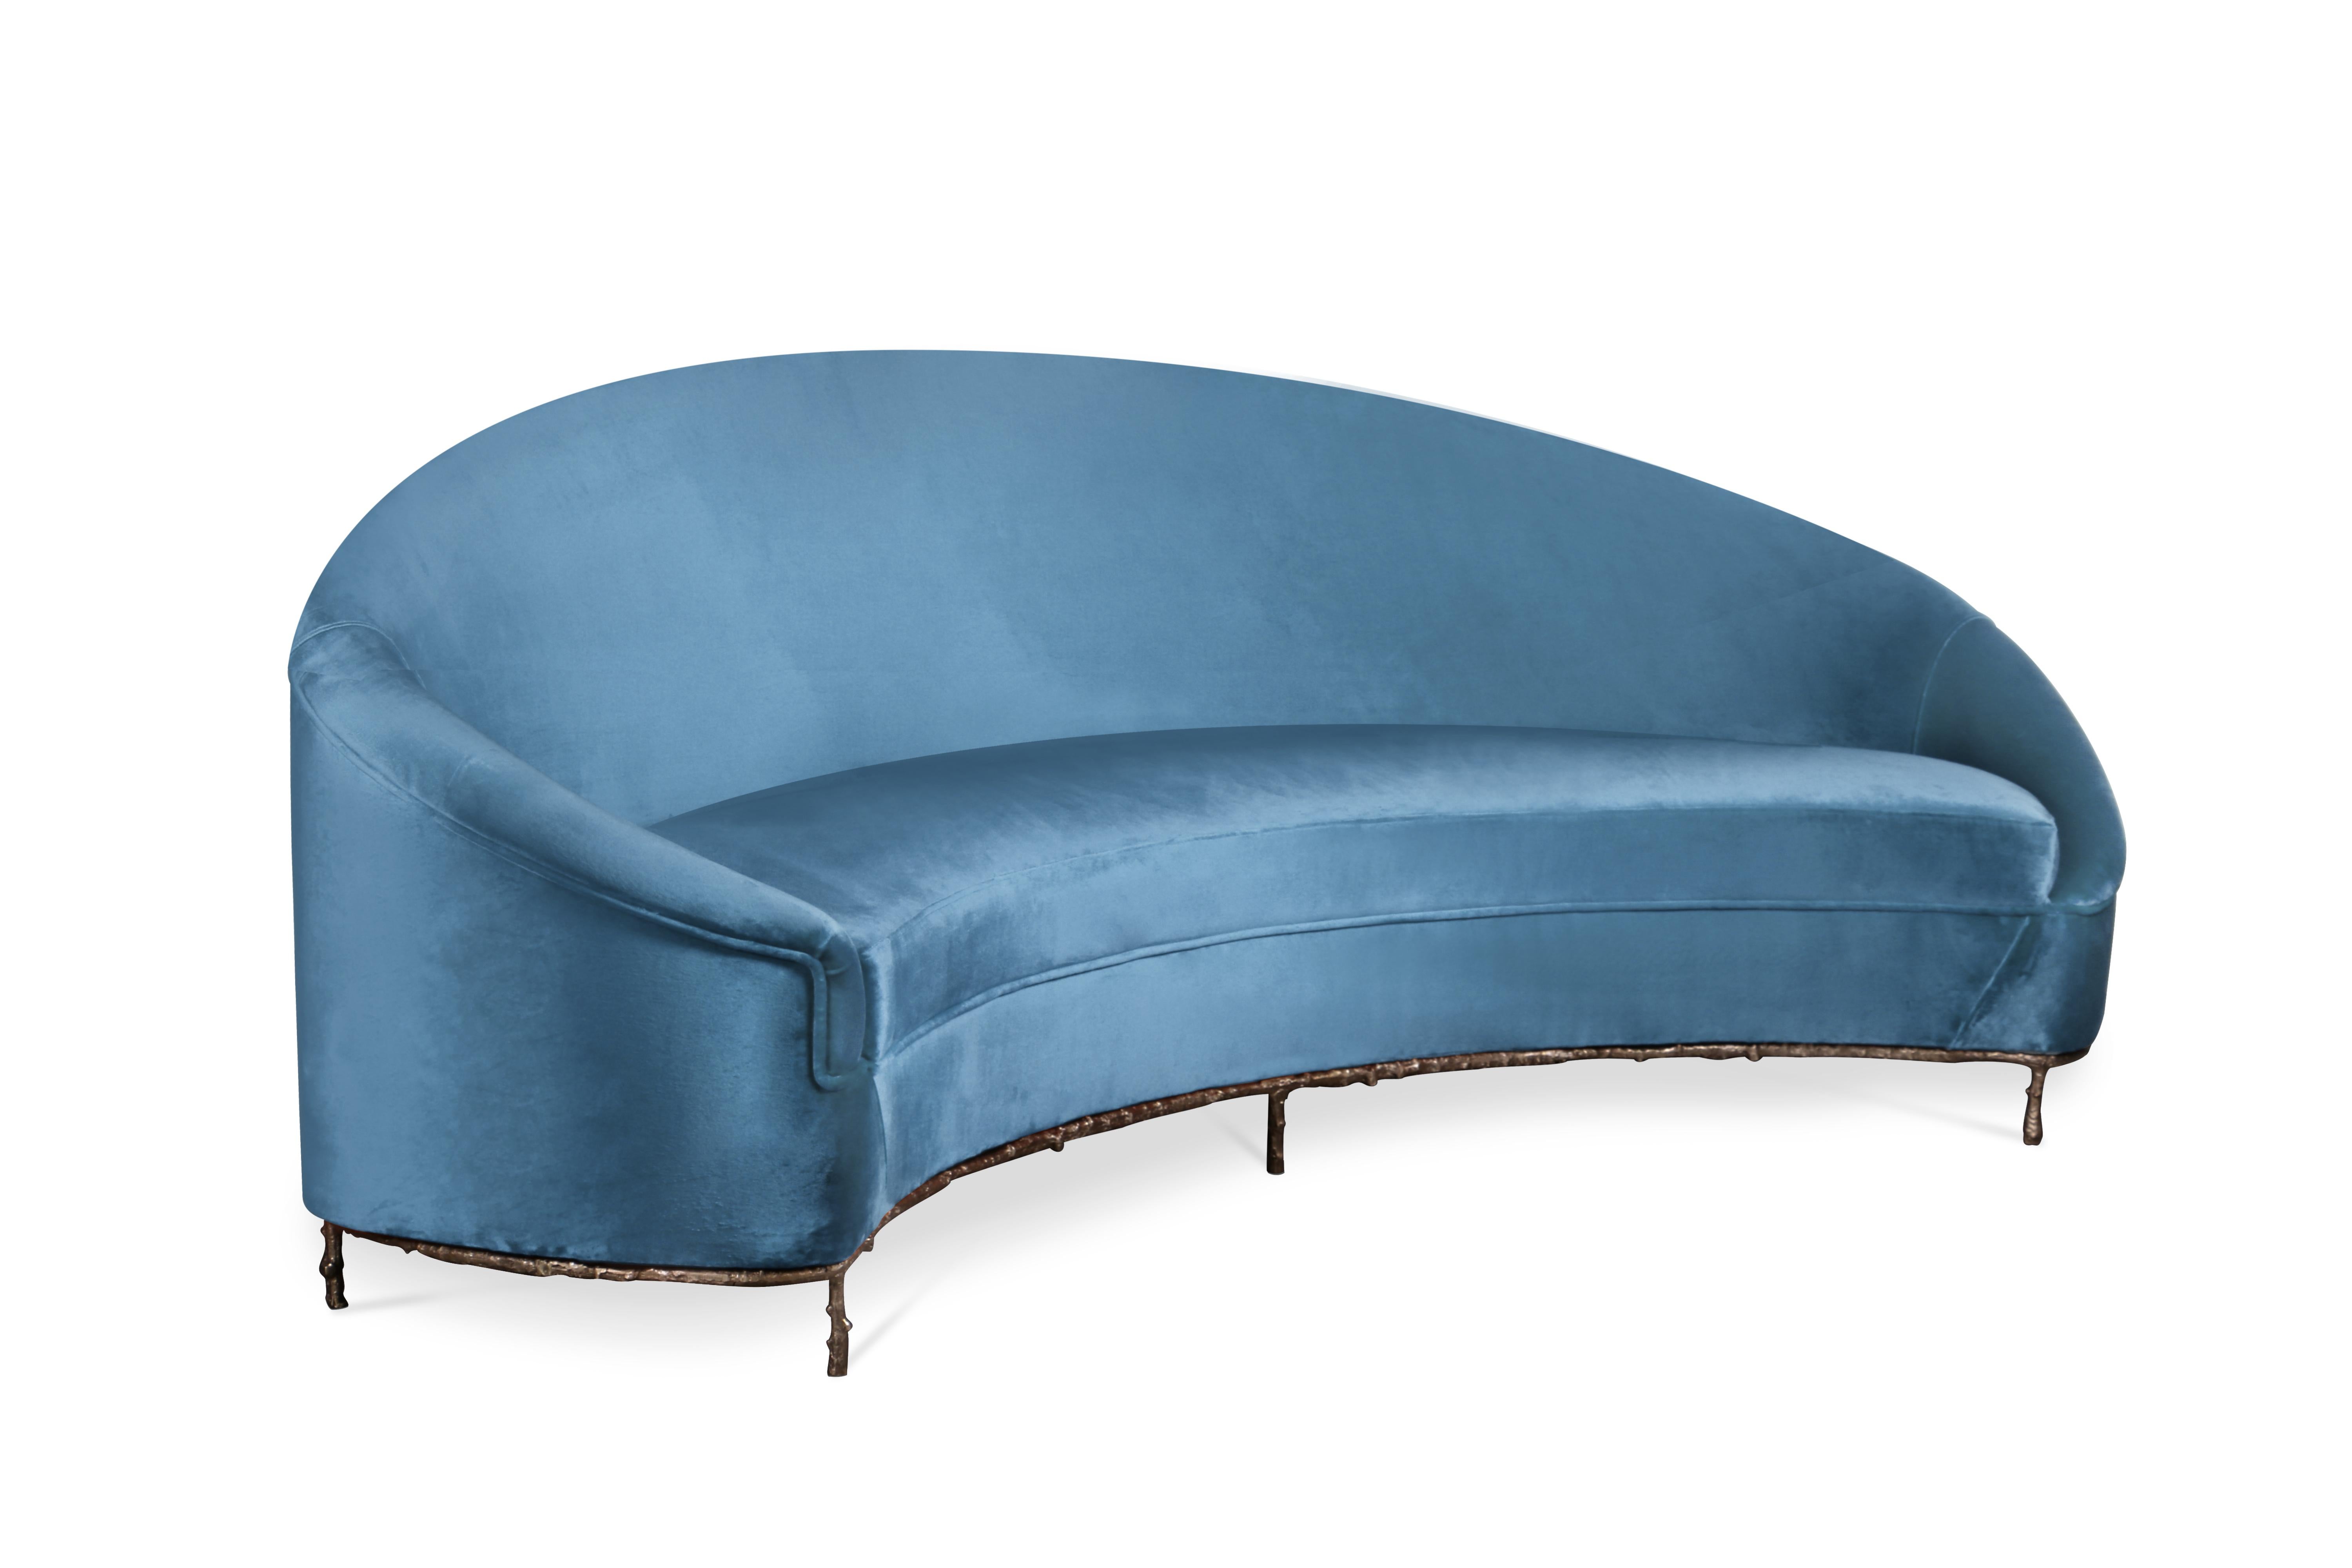 Sexy, mysterious and uninterrupted lines give this sofa highly acclaimed glamour. Upholstered in sumptuous fabric, the cast brass metal resembling a thorn bush branch serves as a base to this luscious lounge sofa.

Options
Upholstery: Available